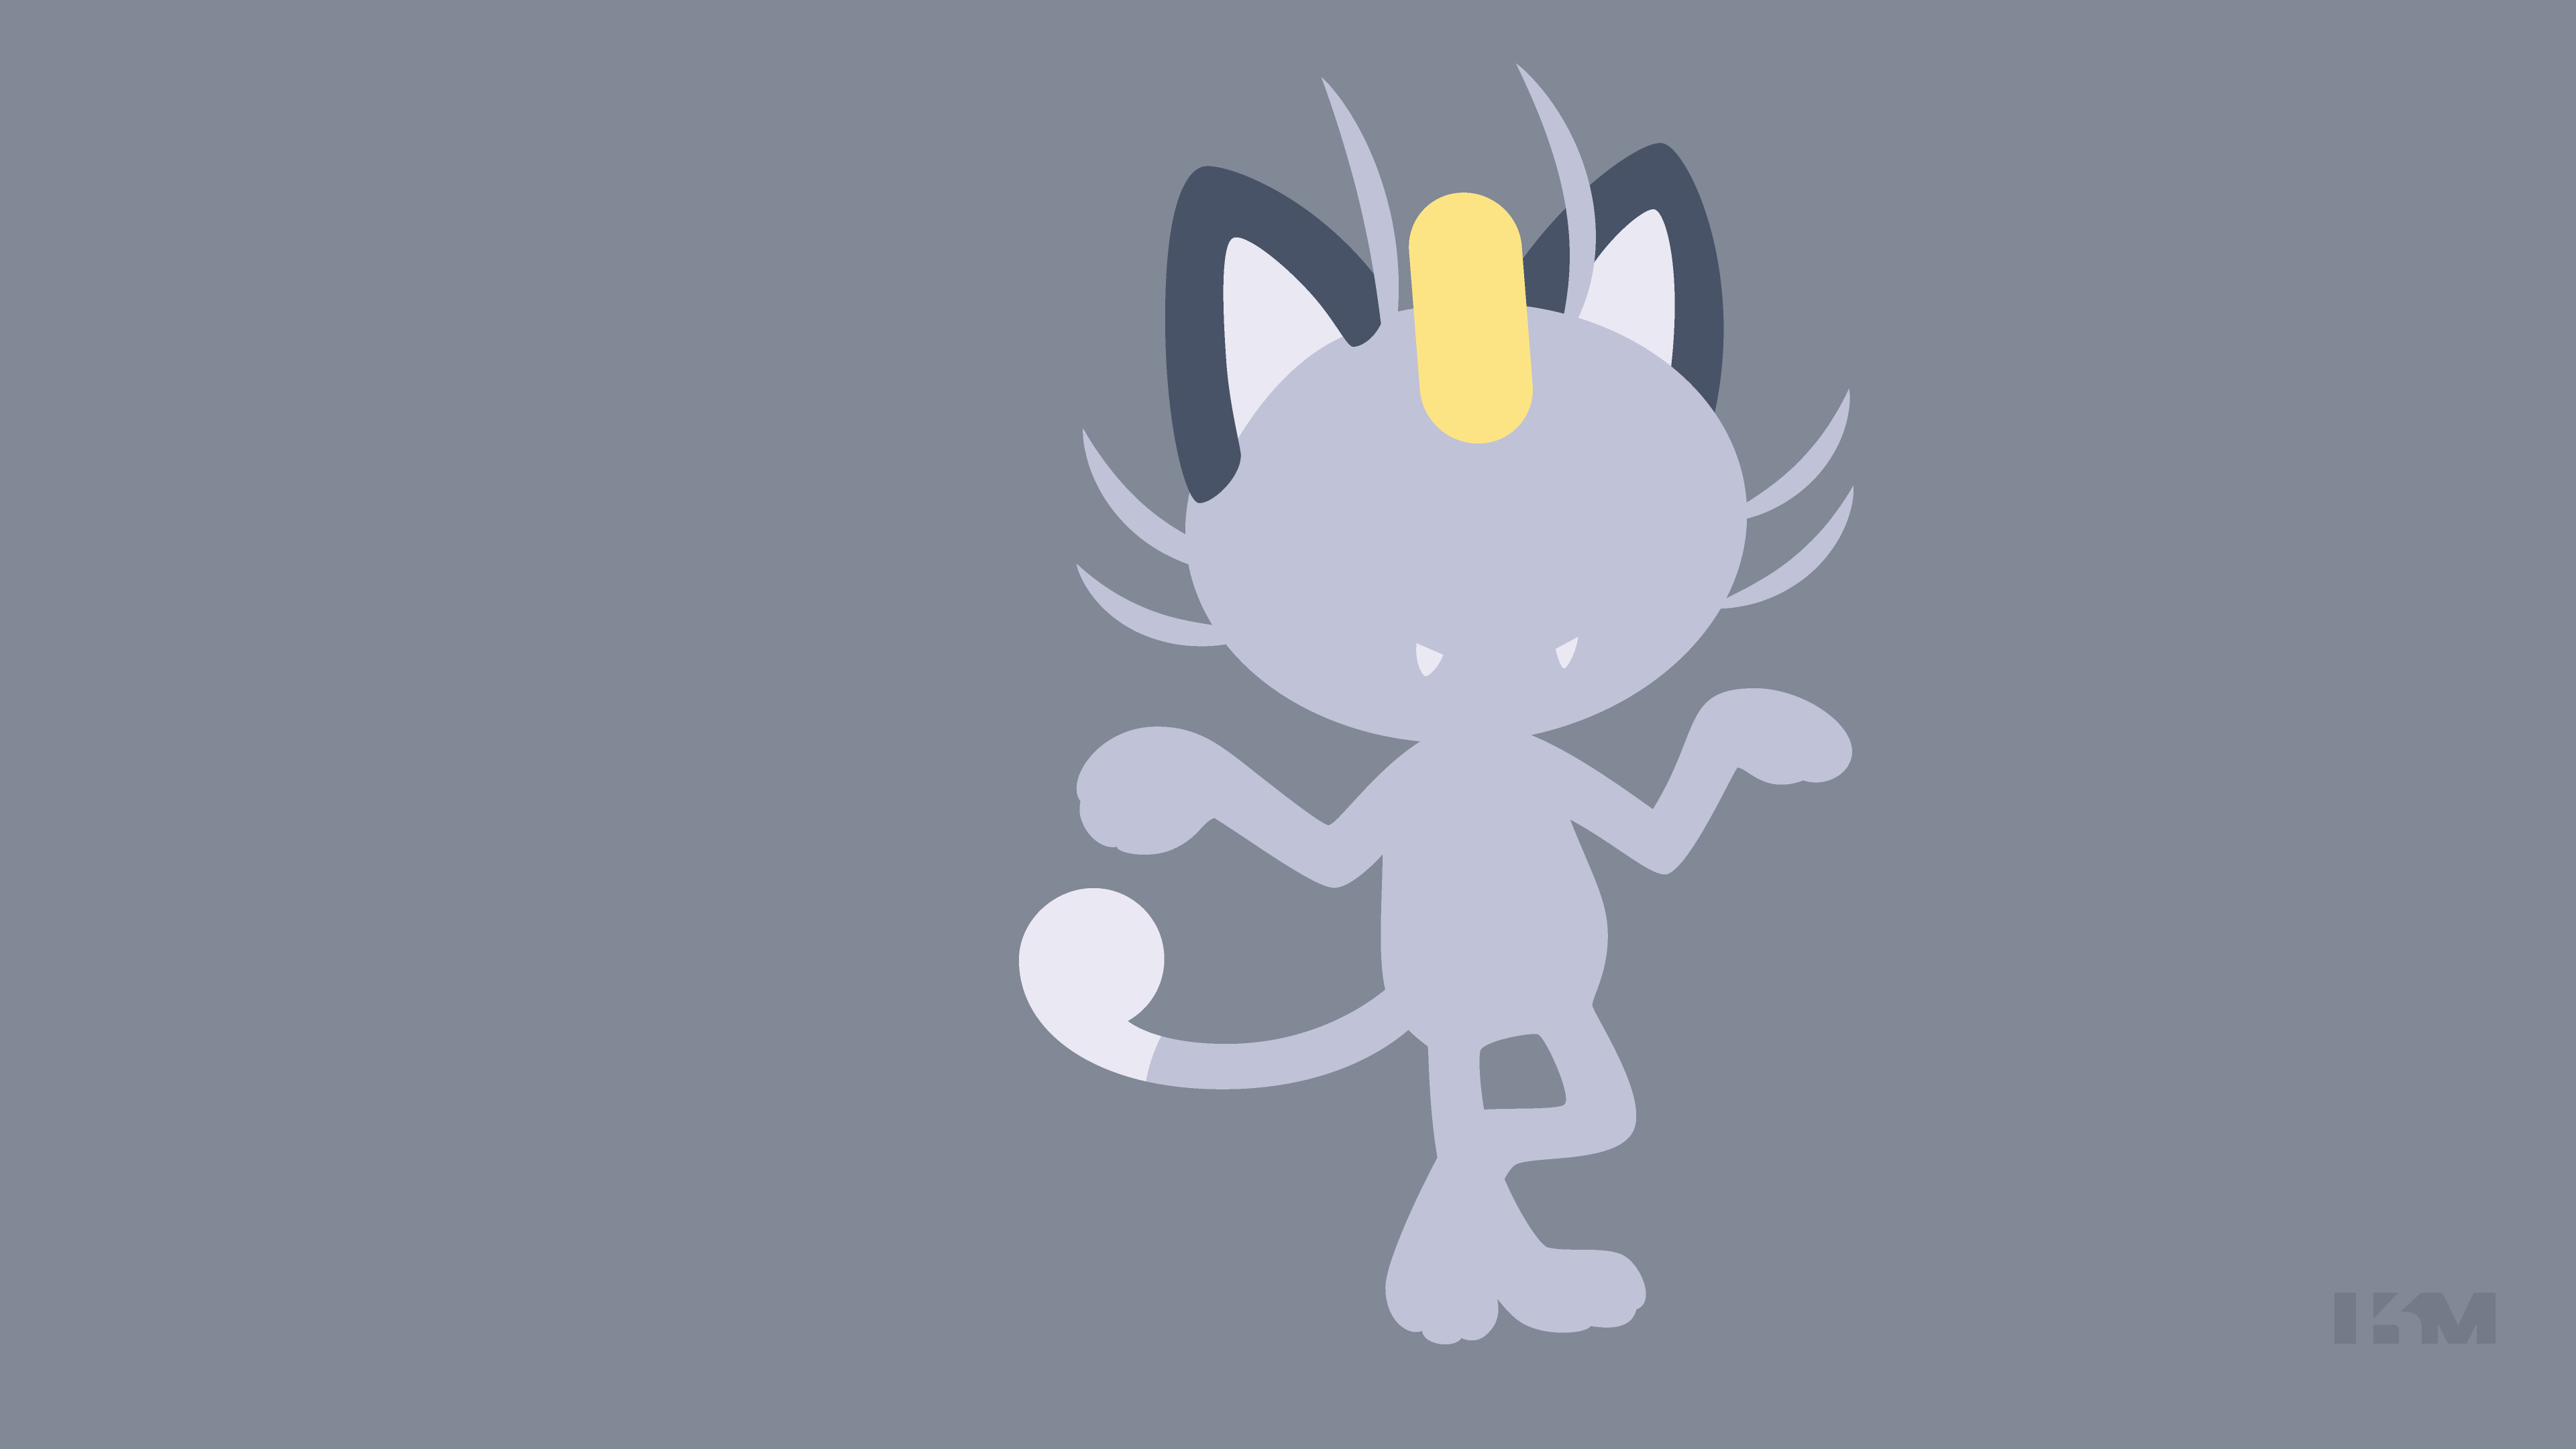 Meowth (Pokémon) HD Wallpaper and Background Image